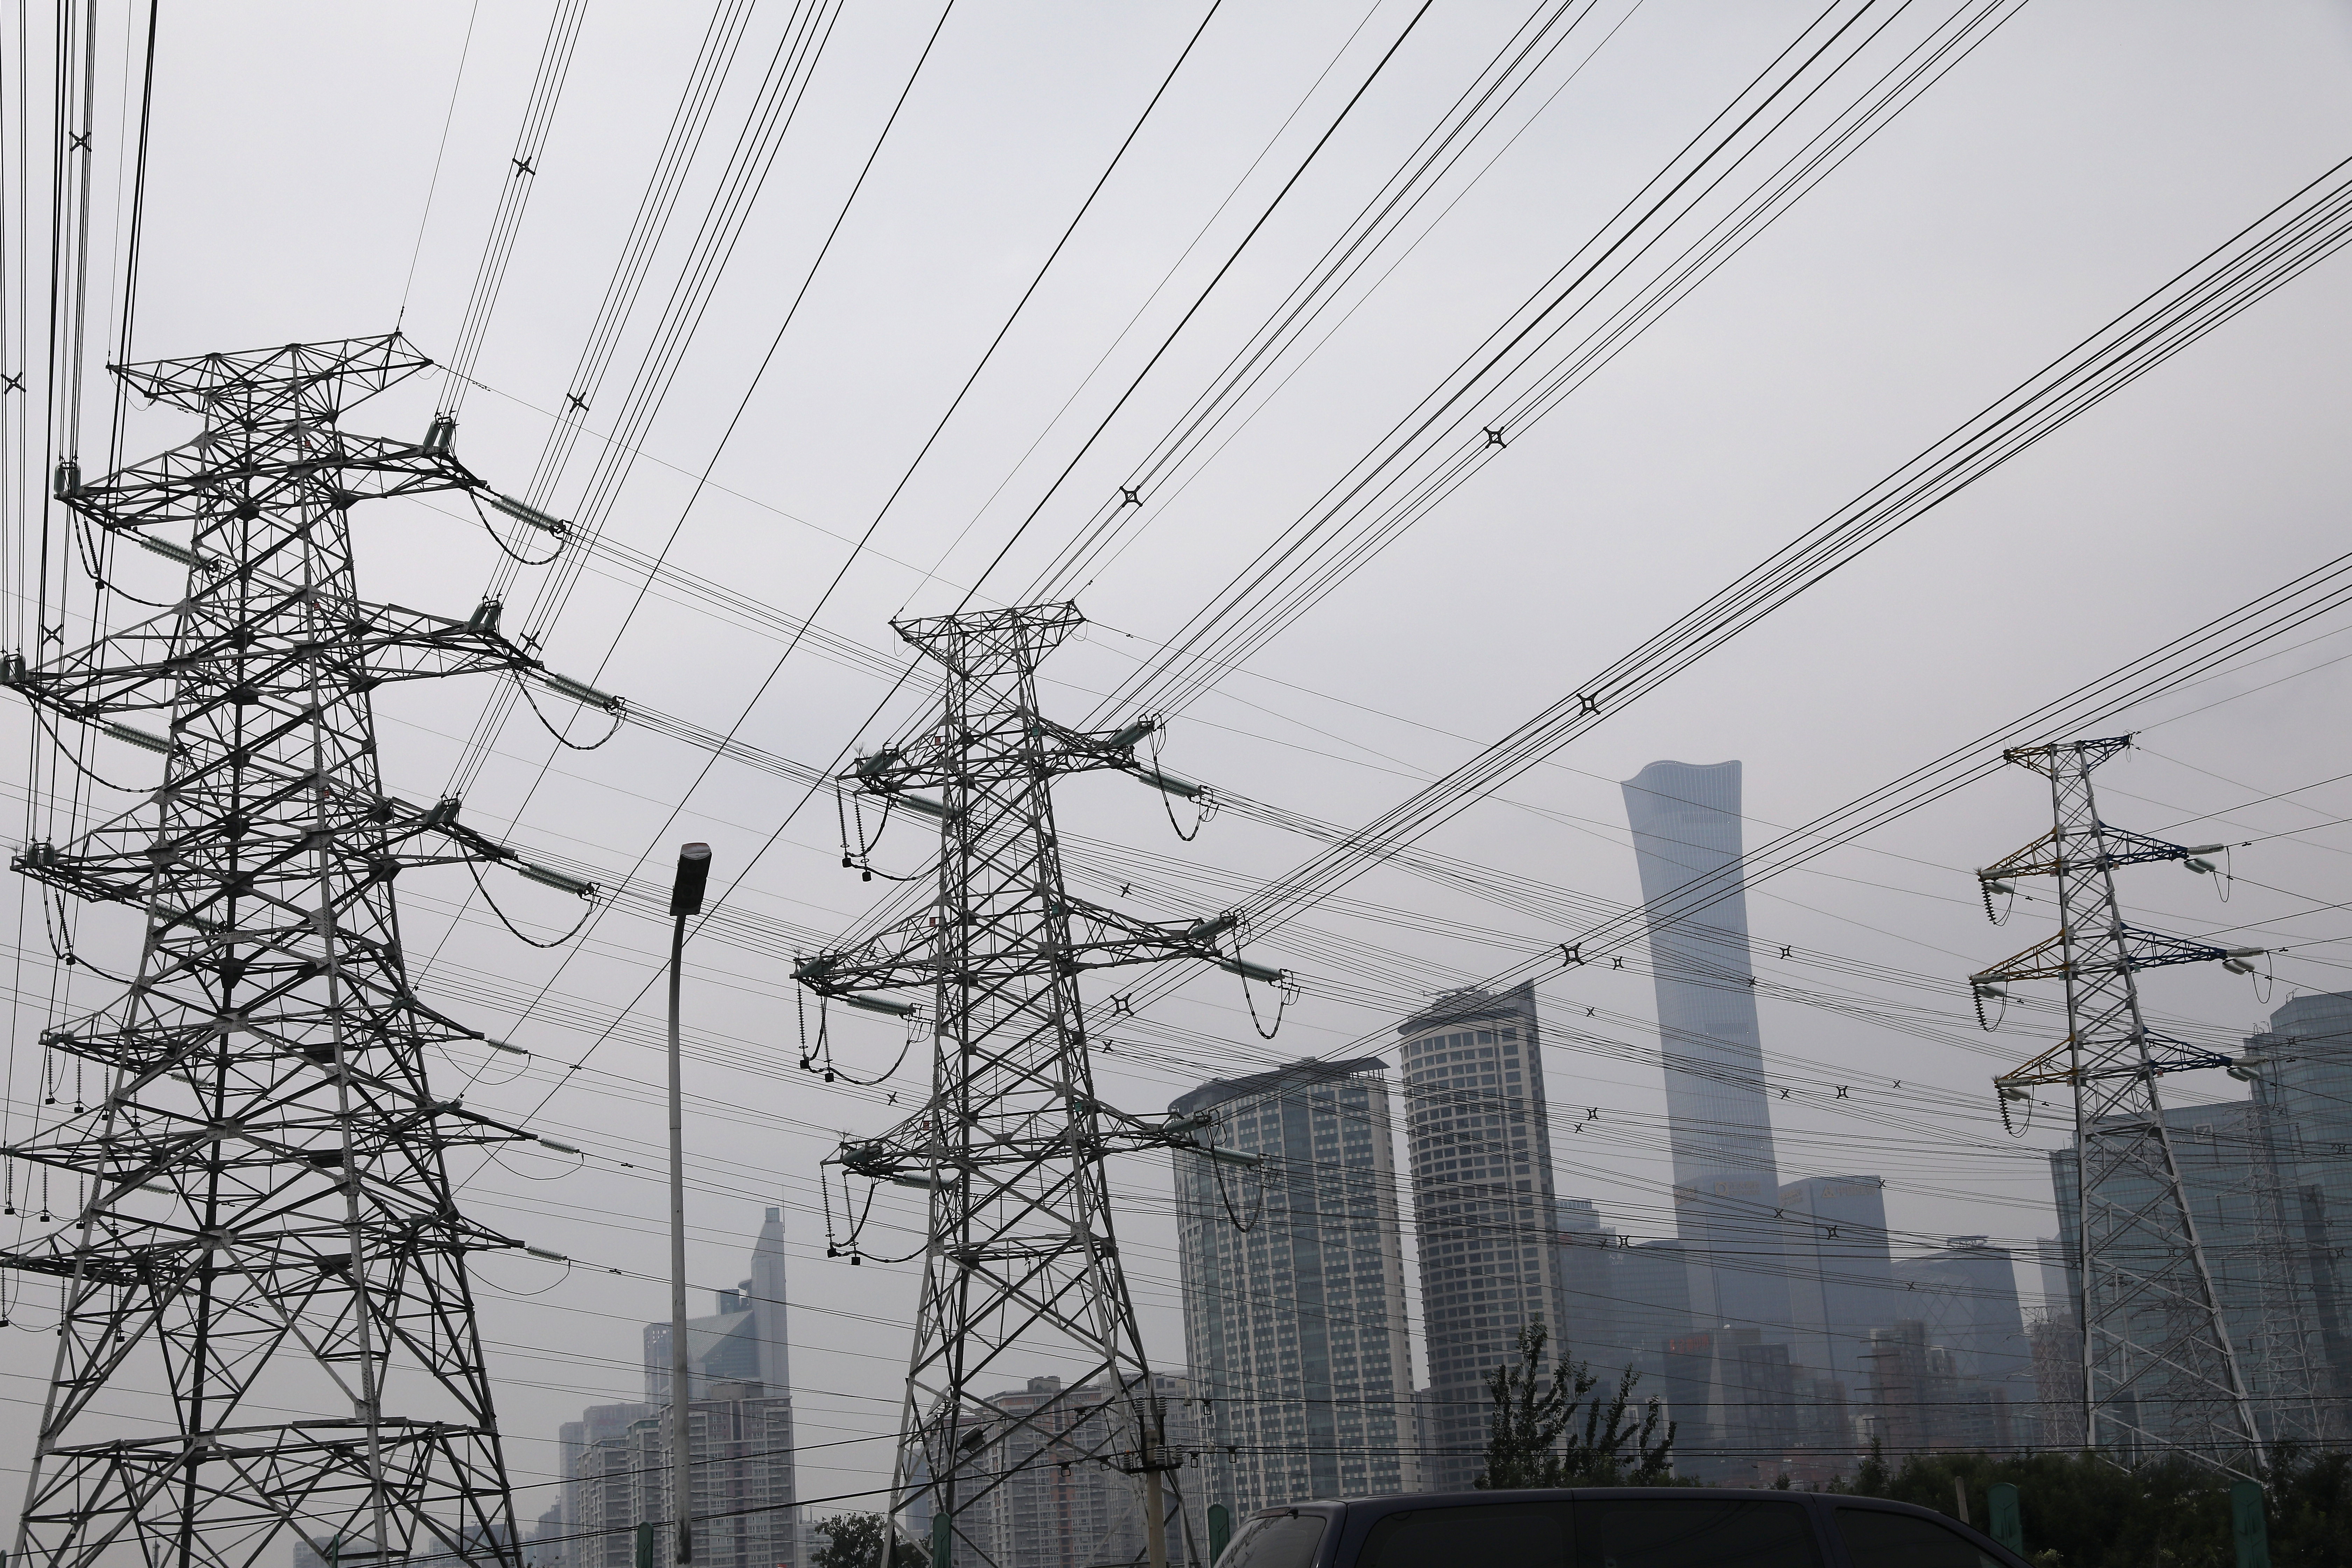 Electricity transmission towers are pictured near Beijing’s Central Business District (CBD), China September 28, 2021. REUTERS/Tingshu Wang